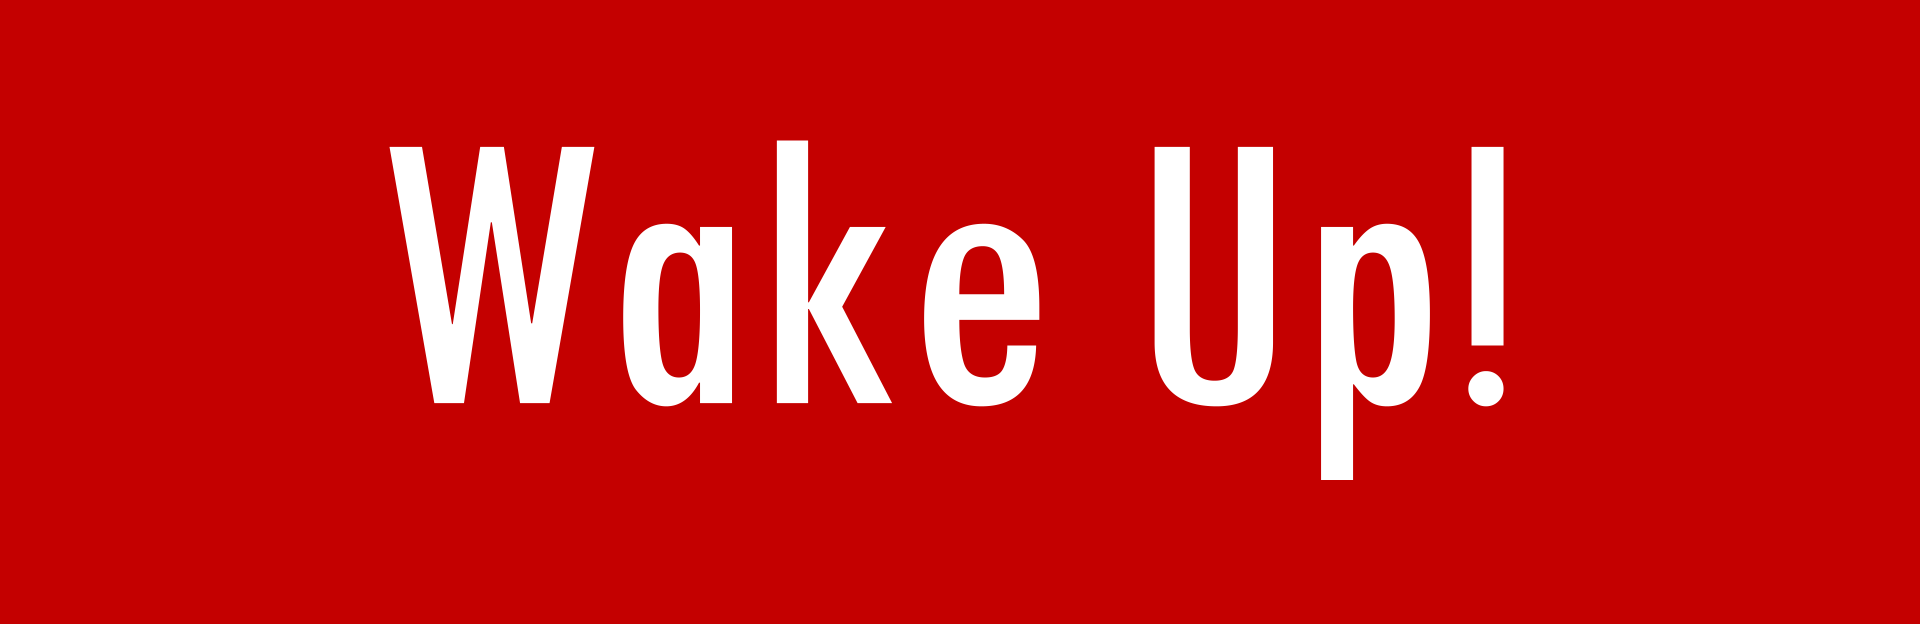 Wake Up! – list of selected artists